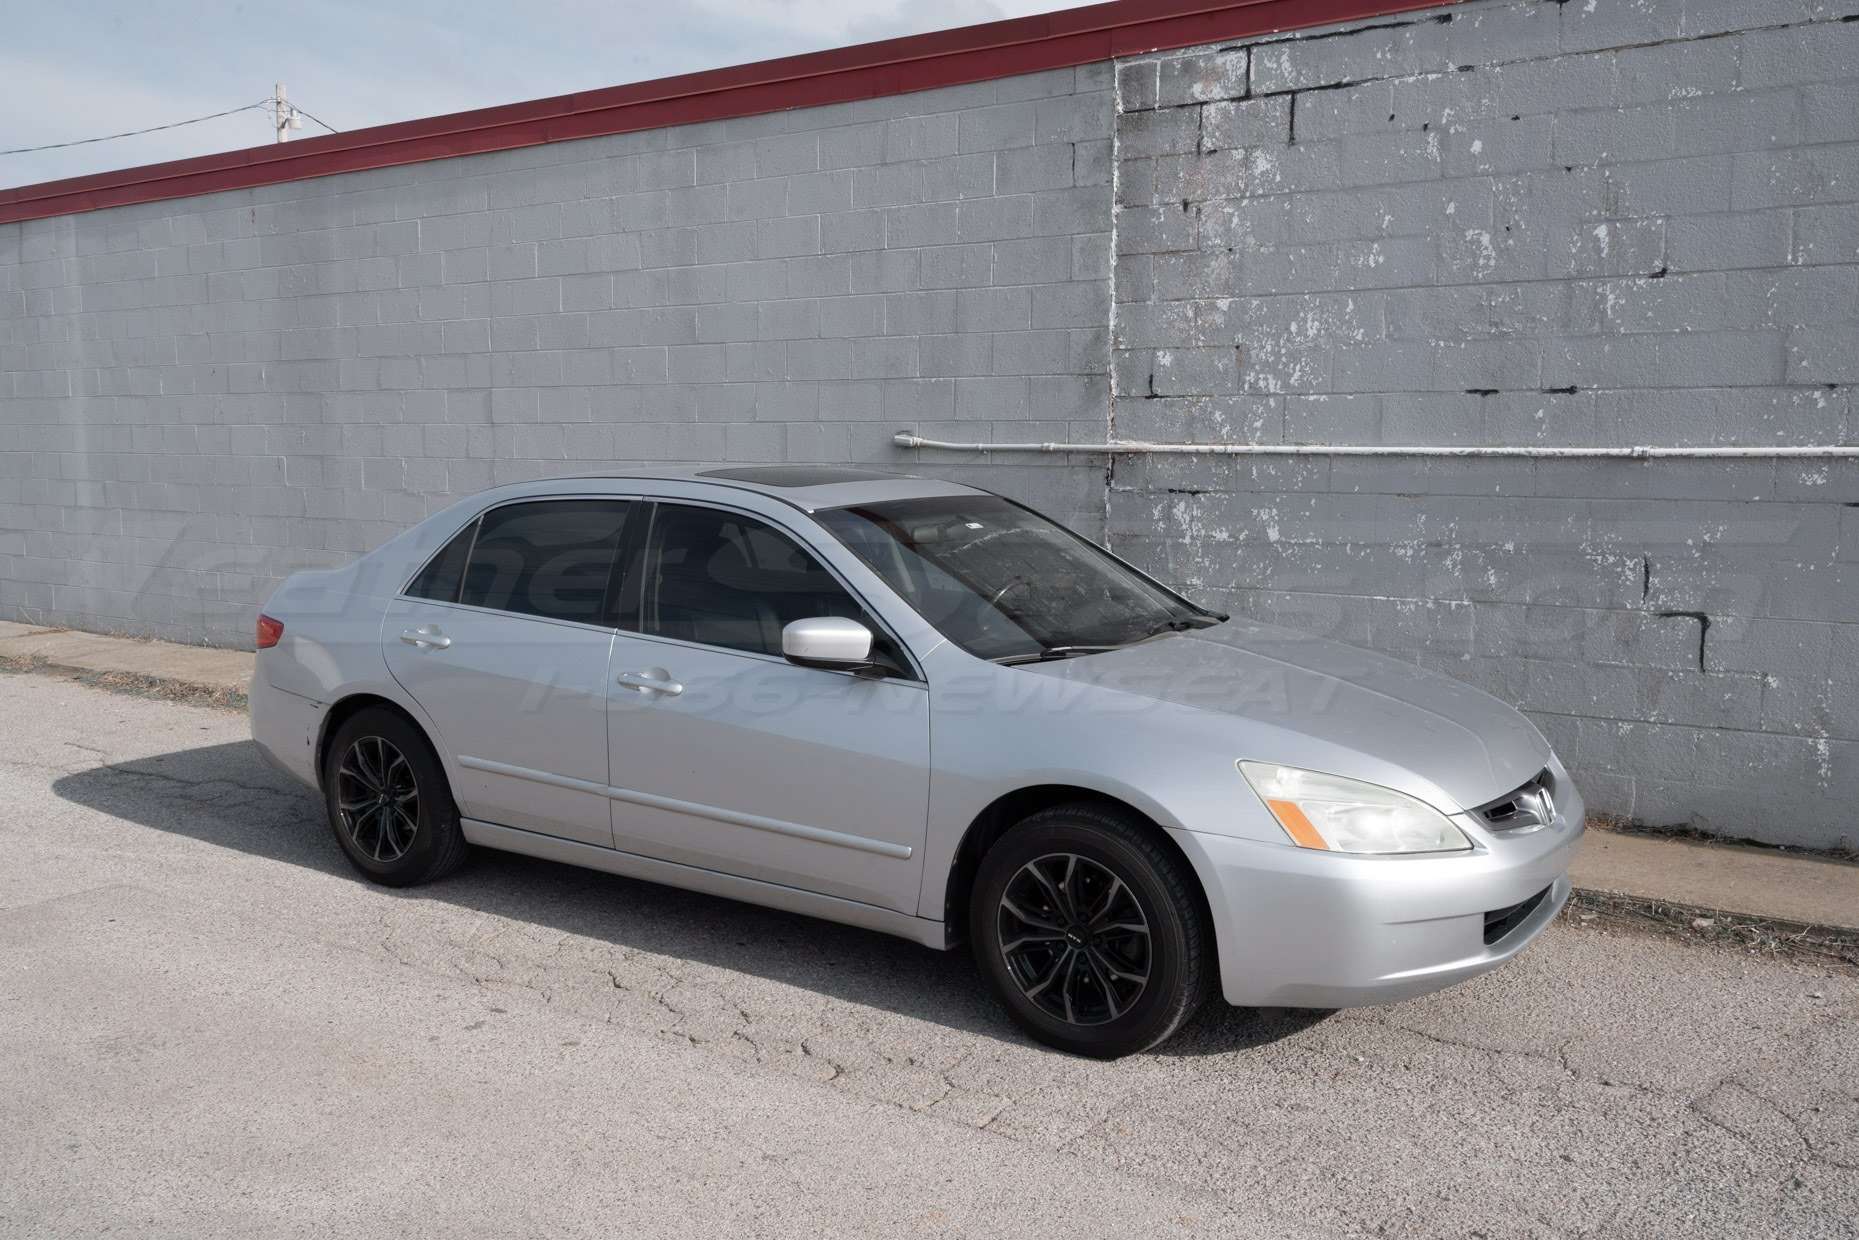 2005 Honda Accord Sedan with Silver exterior and LeatherSeats.com Black leather upholstery